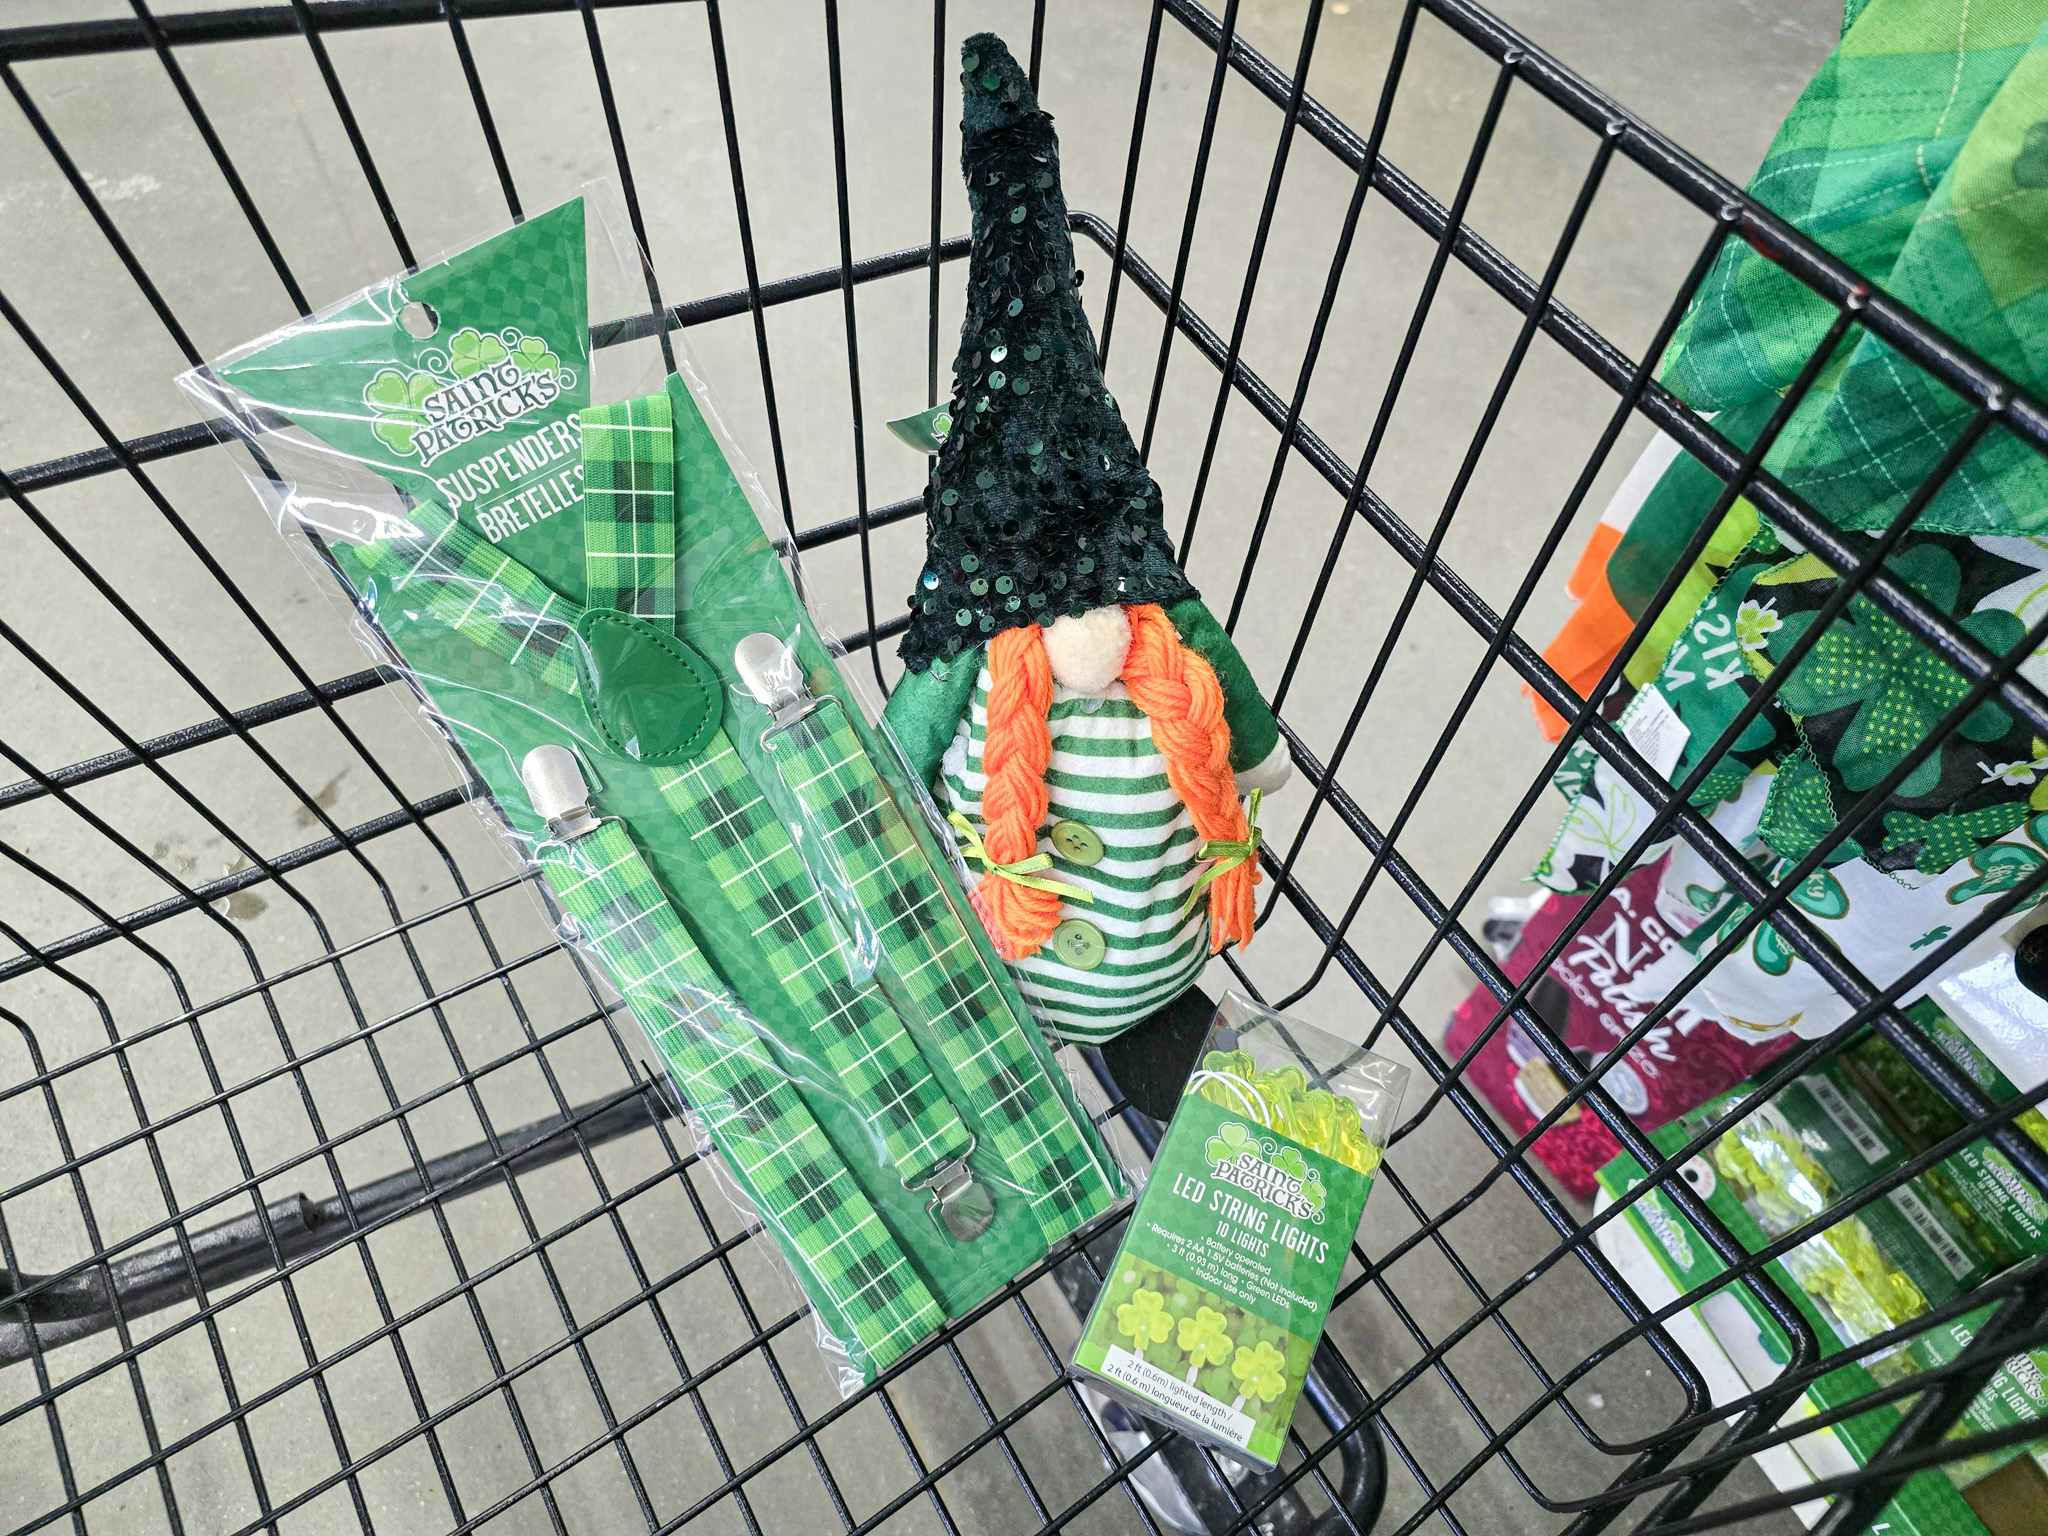 saint patricks day suspenders, a gnome, and string lights in a cart